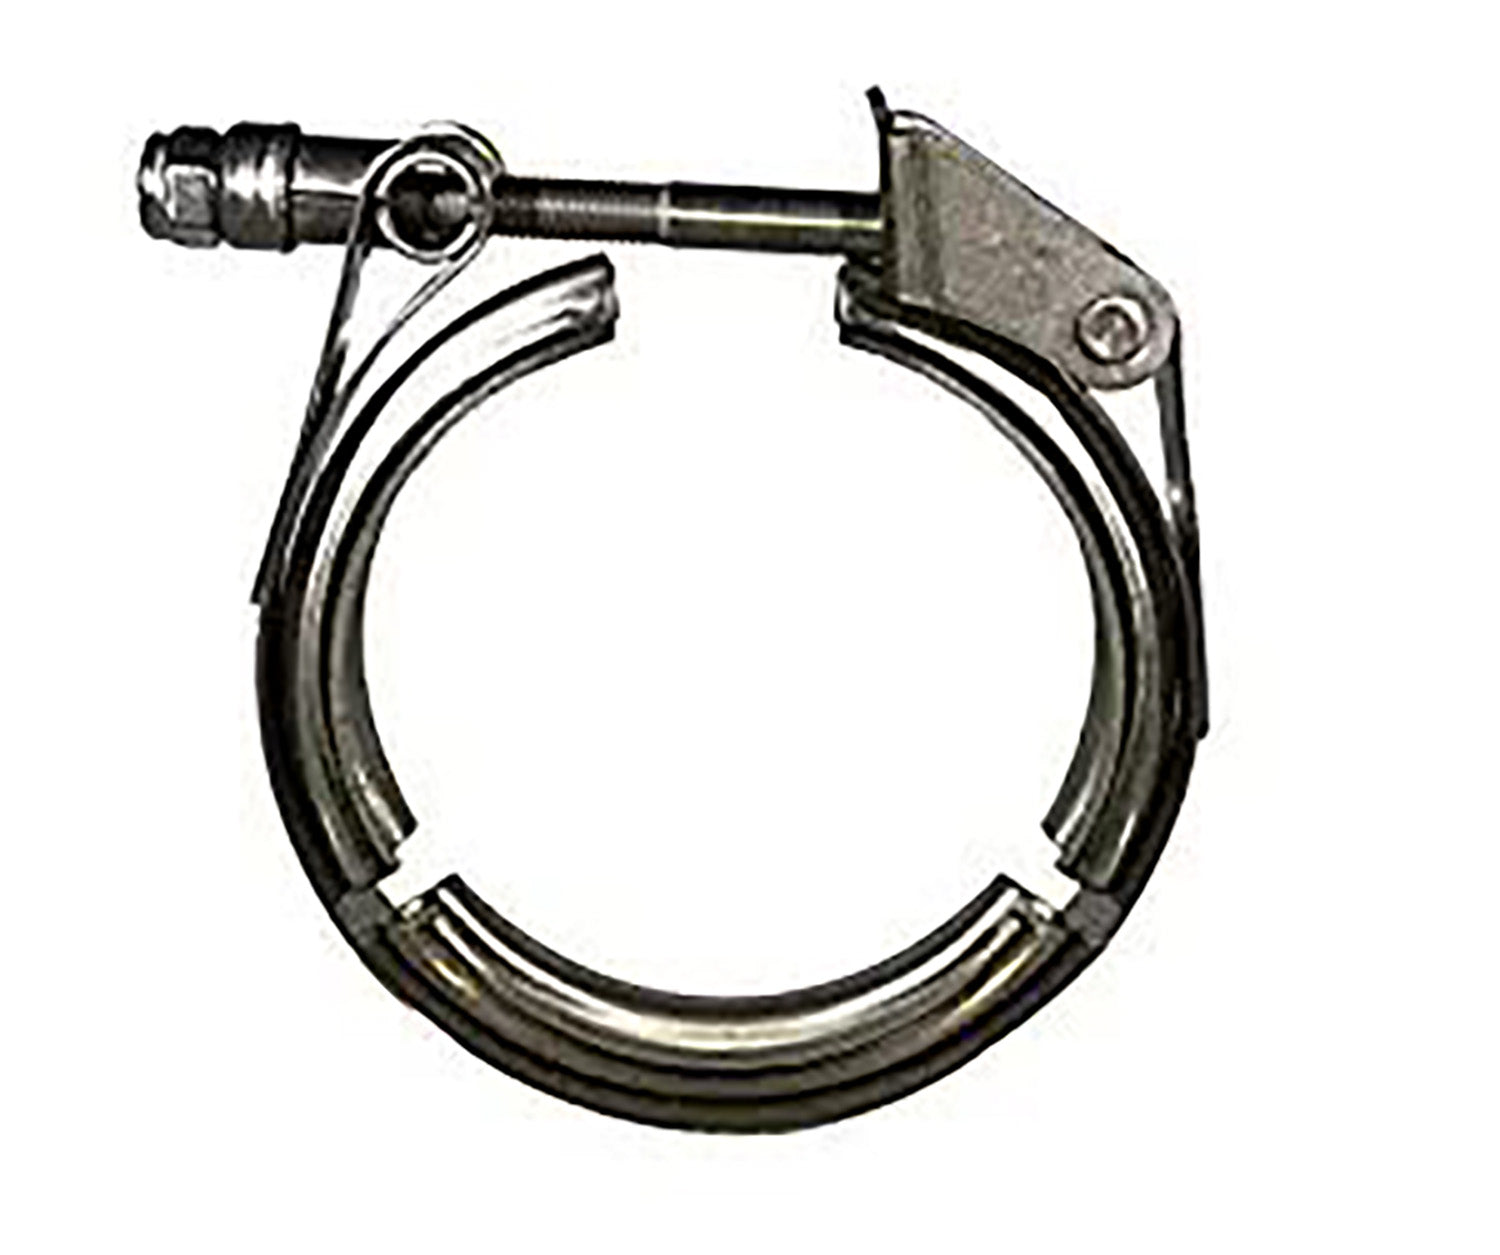 2.00" V Band Clamp Stainless Steel